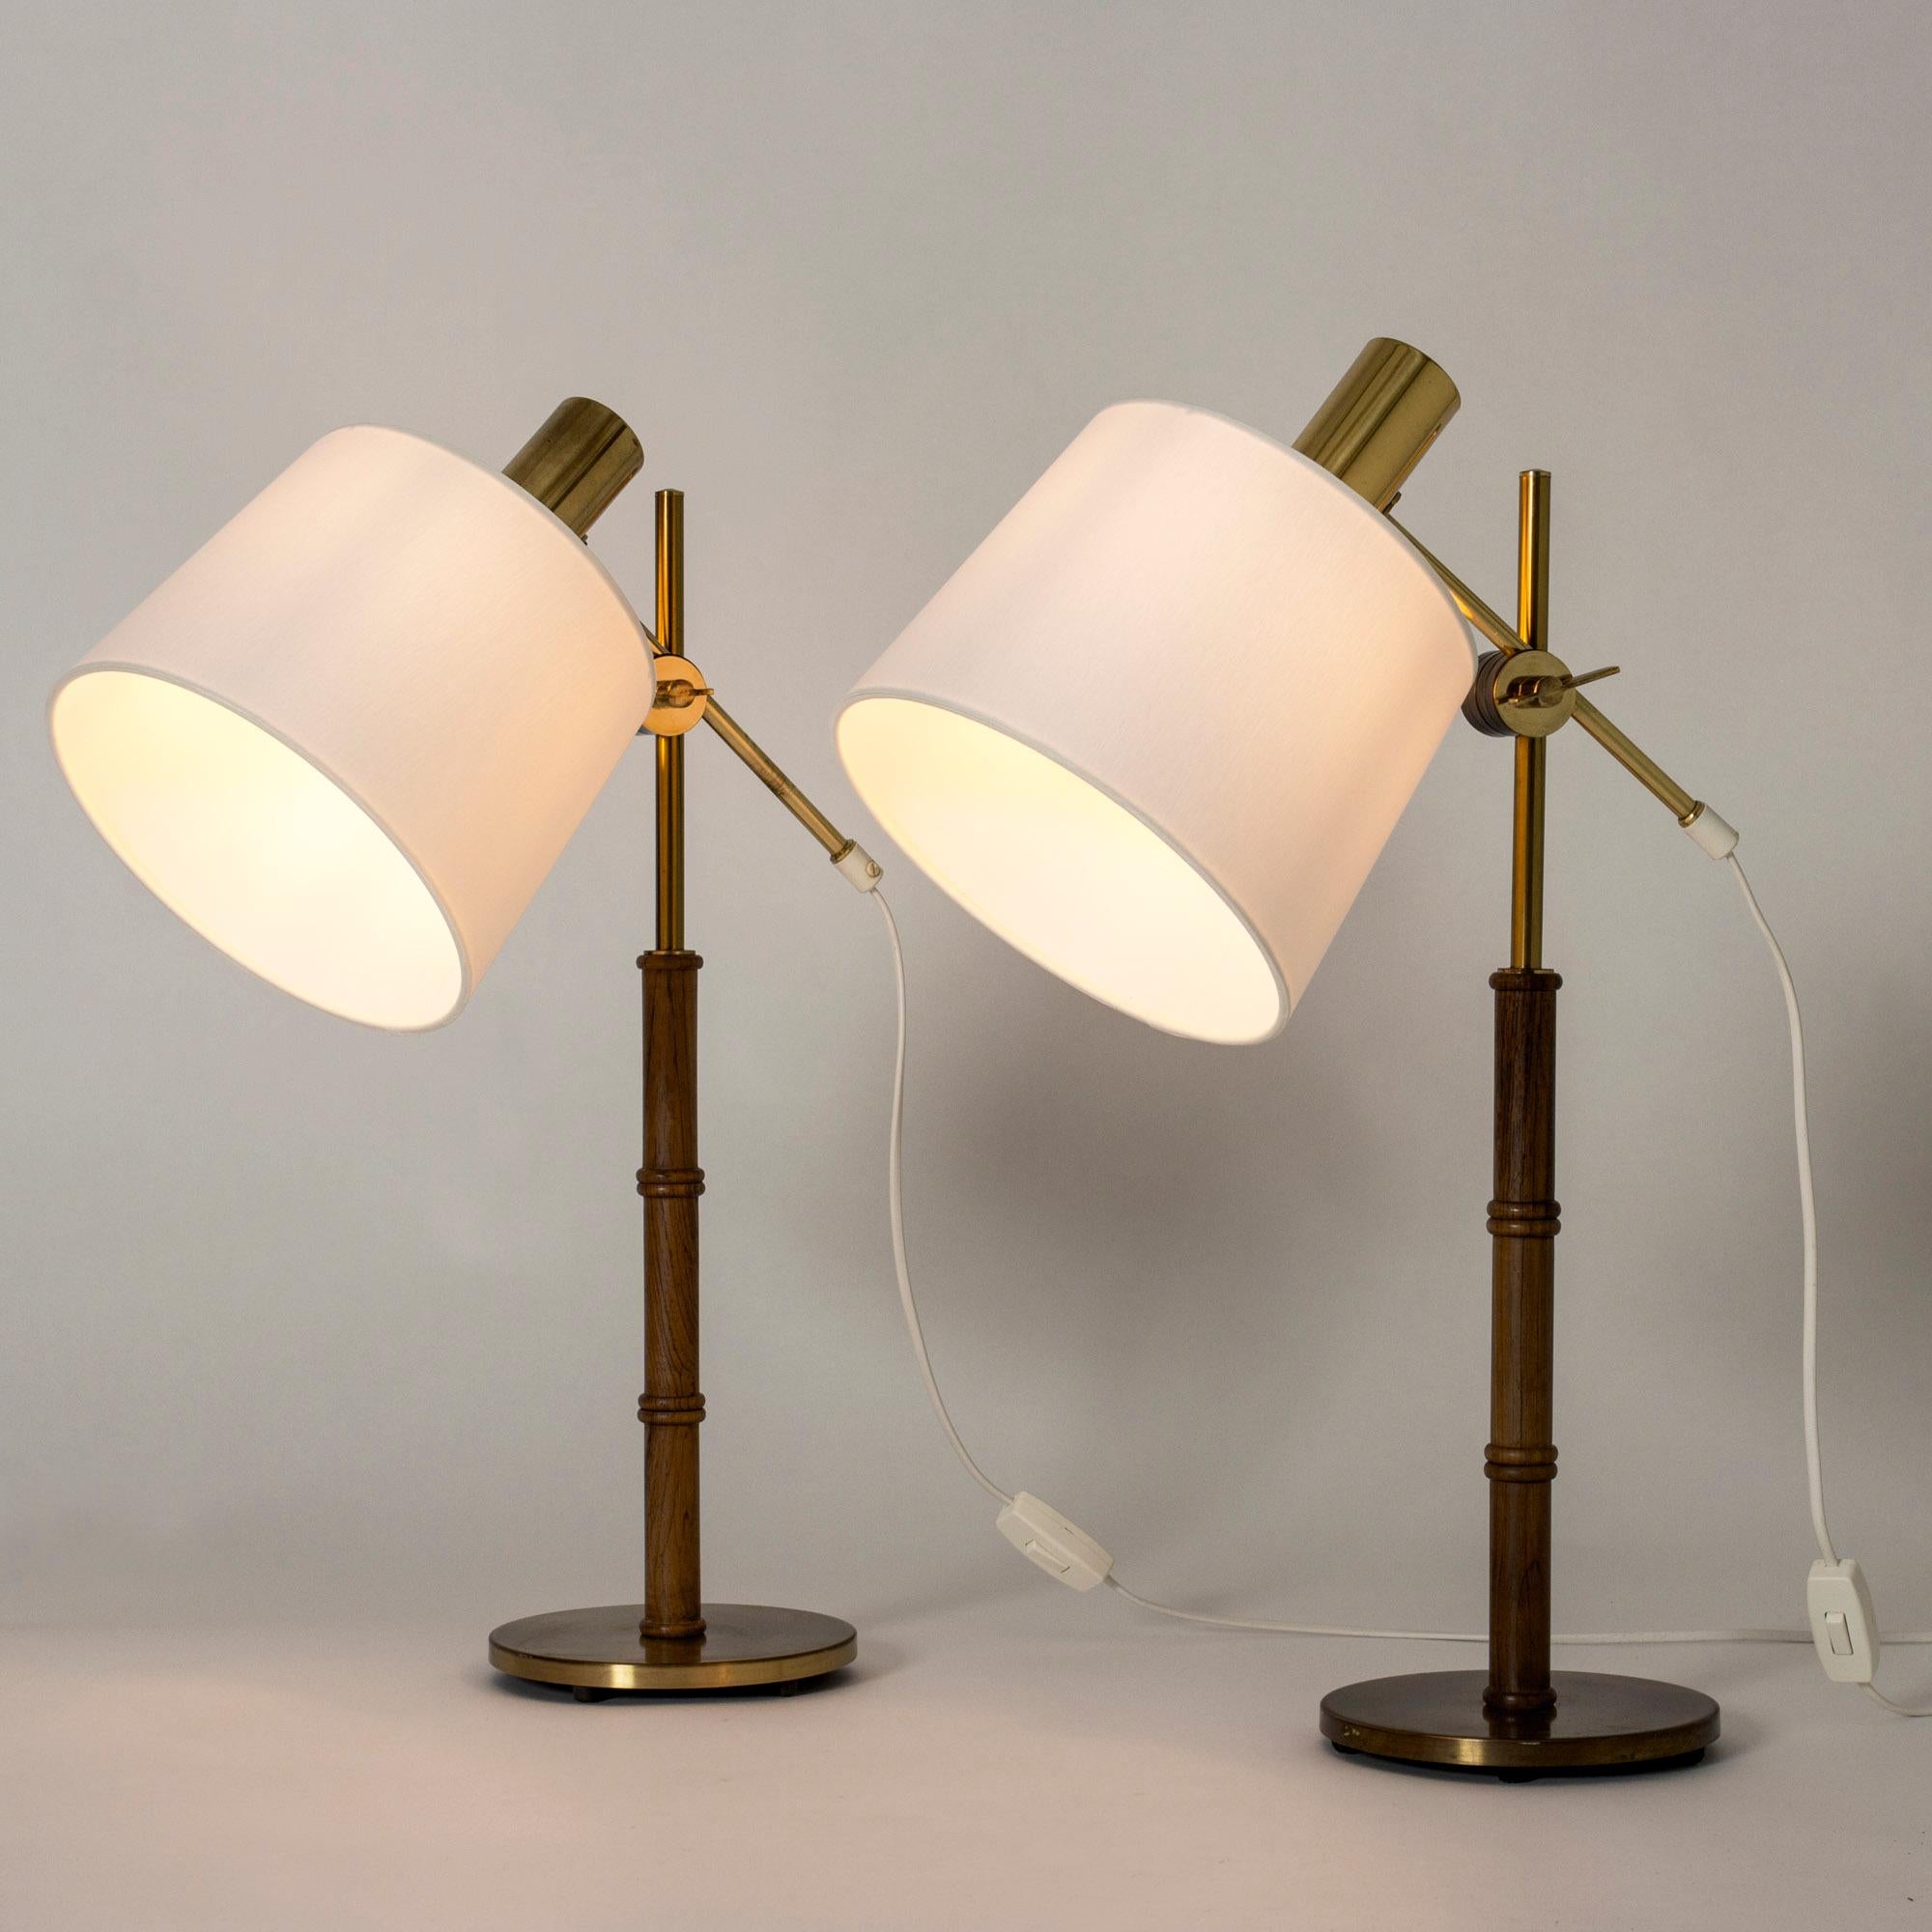 Pair of elegant table or desk lamps from Falkenbergs Belysning, made from brass with rosewood stems. Wood carved into a bamboo-stem form. Adjustable height and angle of the shades.